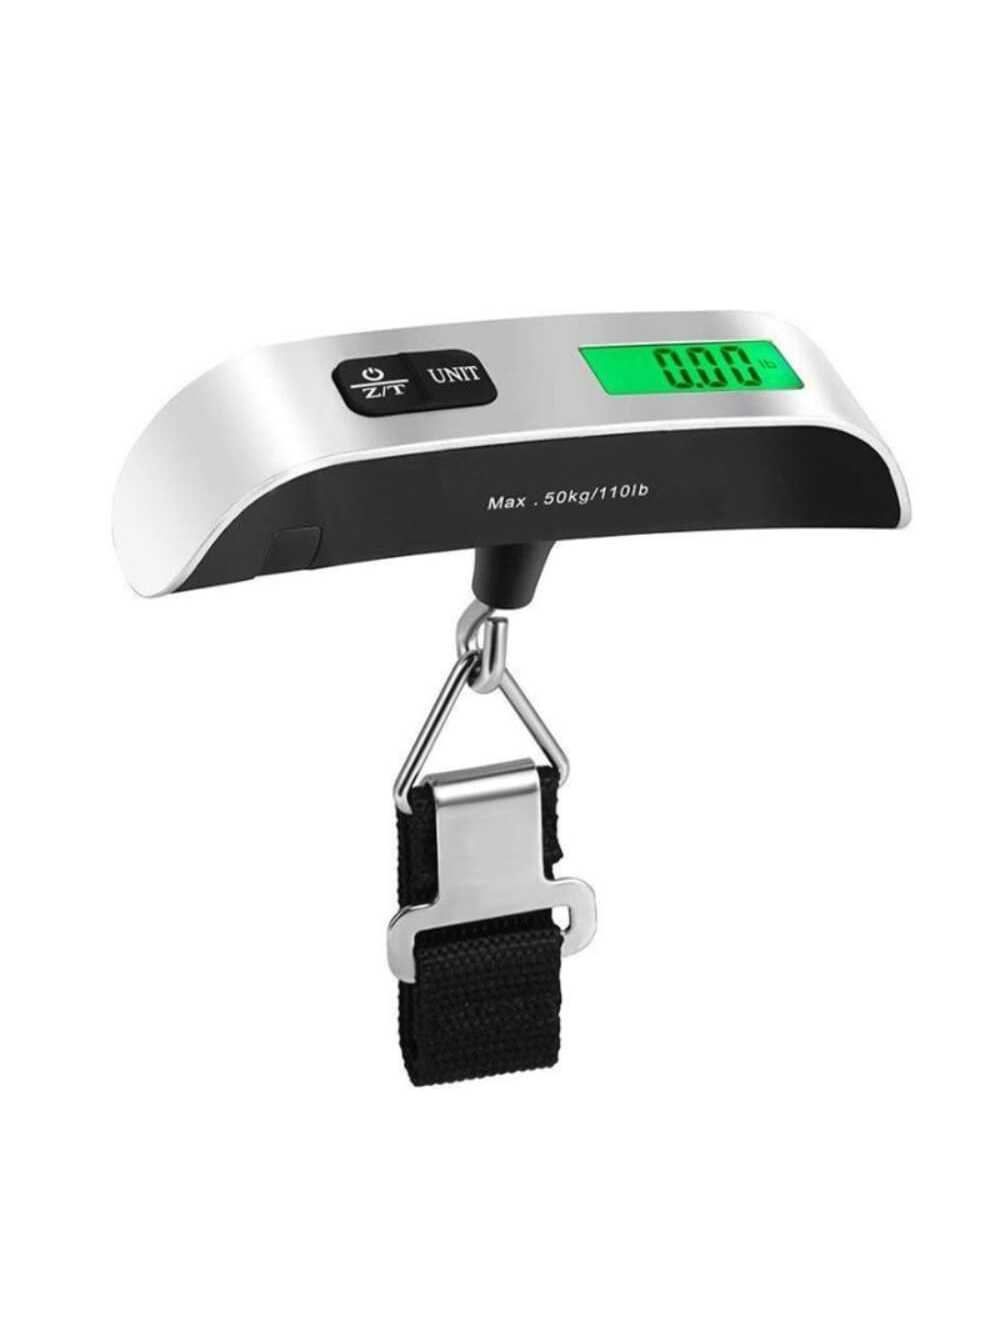 1pcs Portable Scale Digital LCD Display 110lb/50kg Electronic Luggage Hanging Suitcase Travel Weighs Baggage Bag Weight Balance-Silver-3